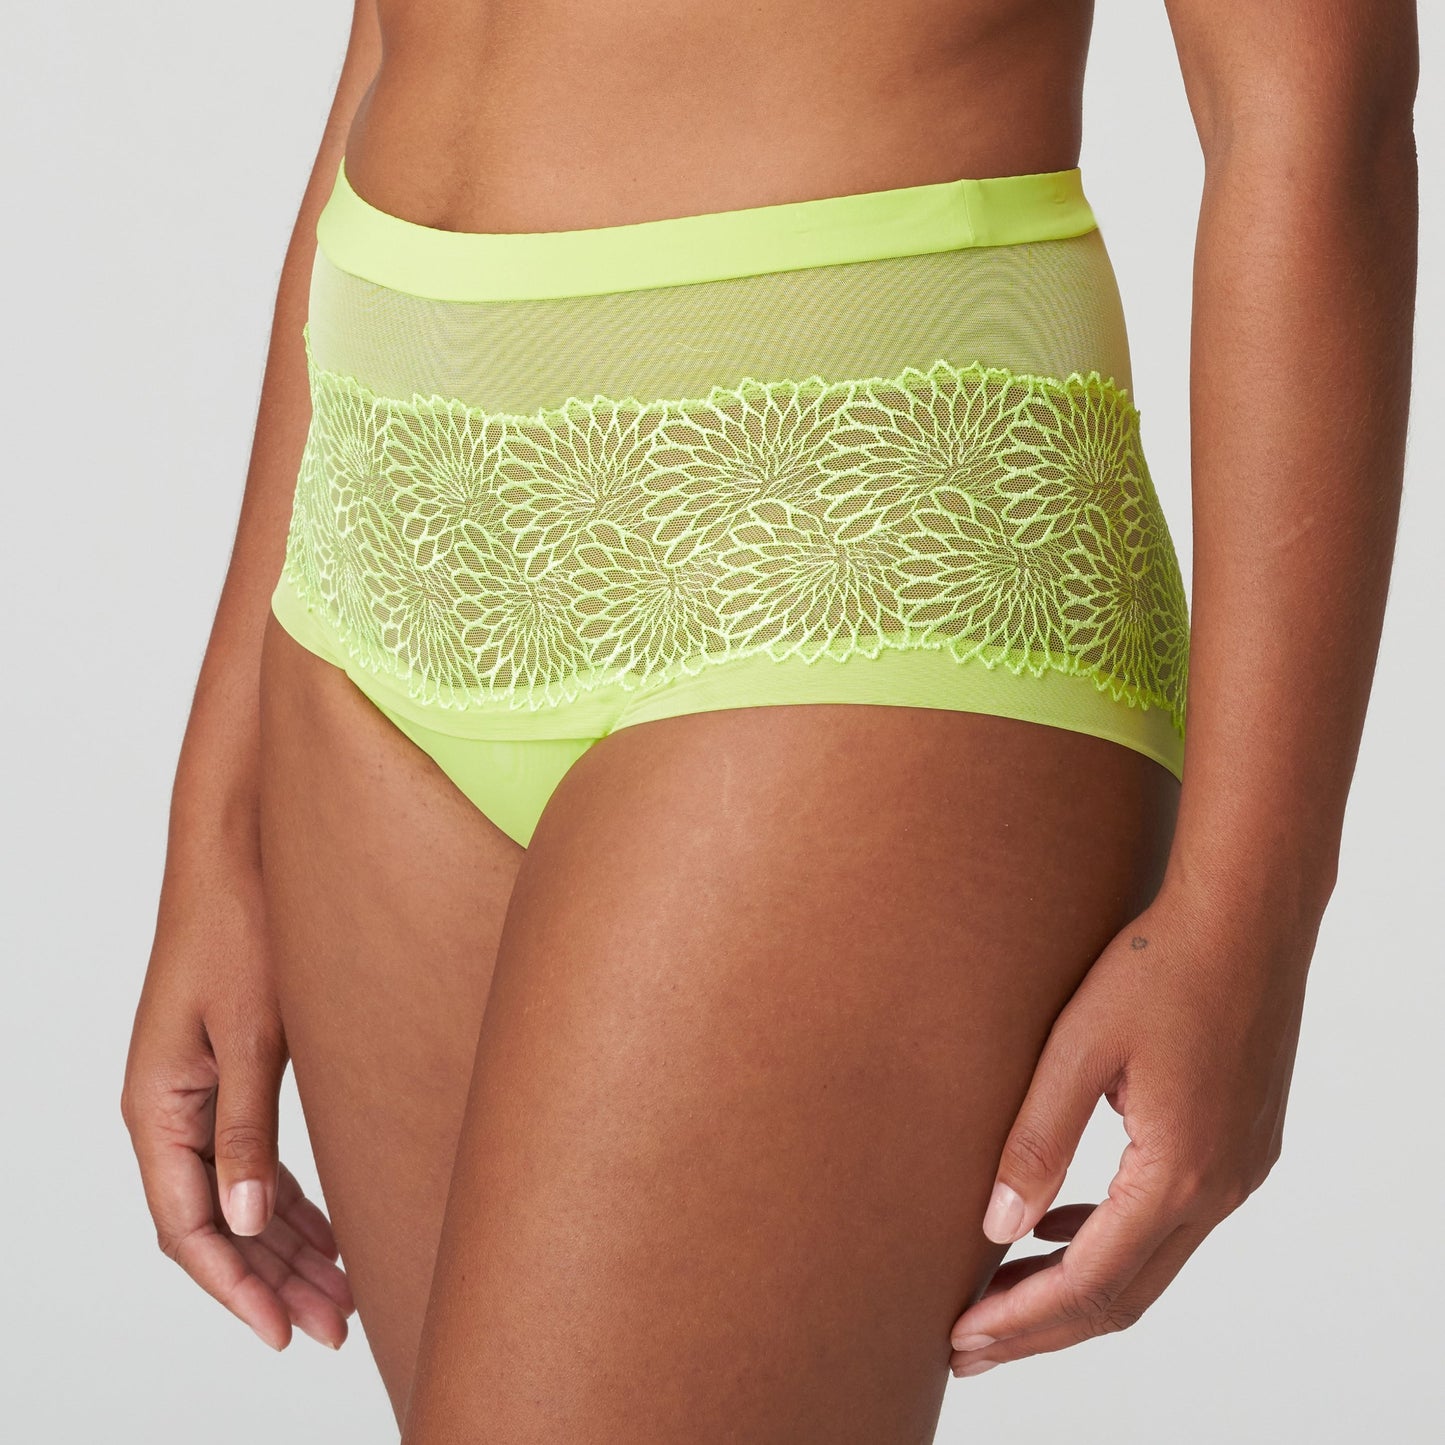 Side view of a woman wearing the Sophora high-waisted cheeky panty in Lime Crush by PrimaDonna.